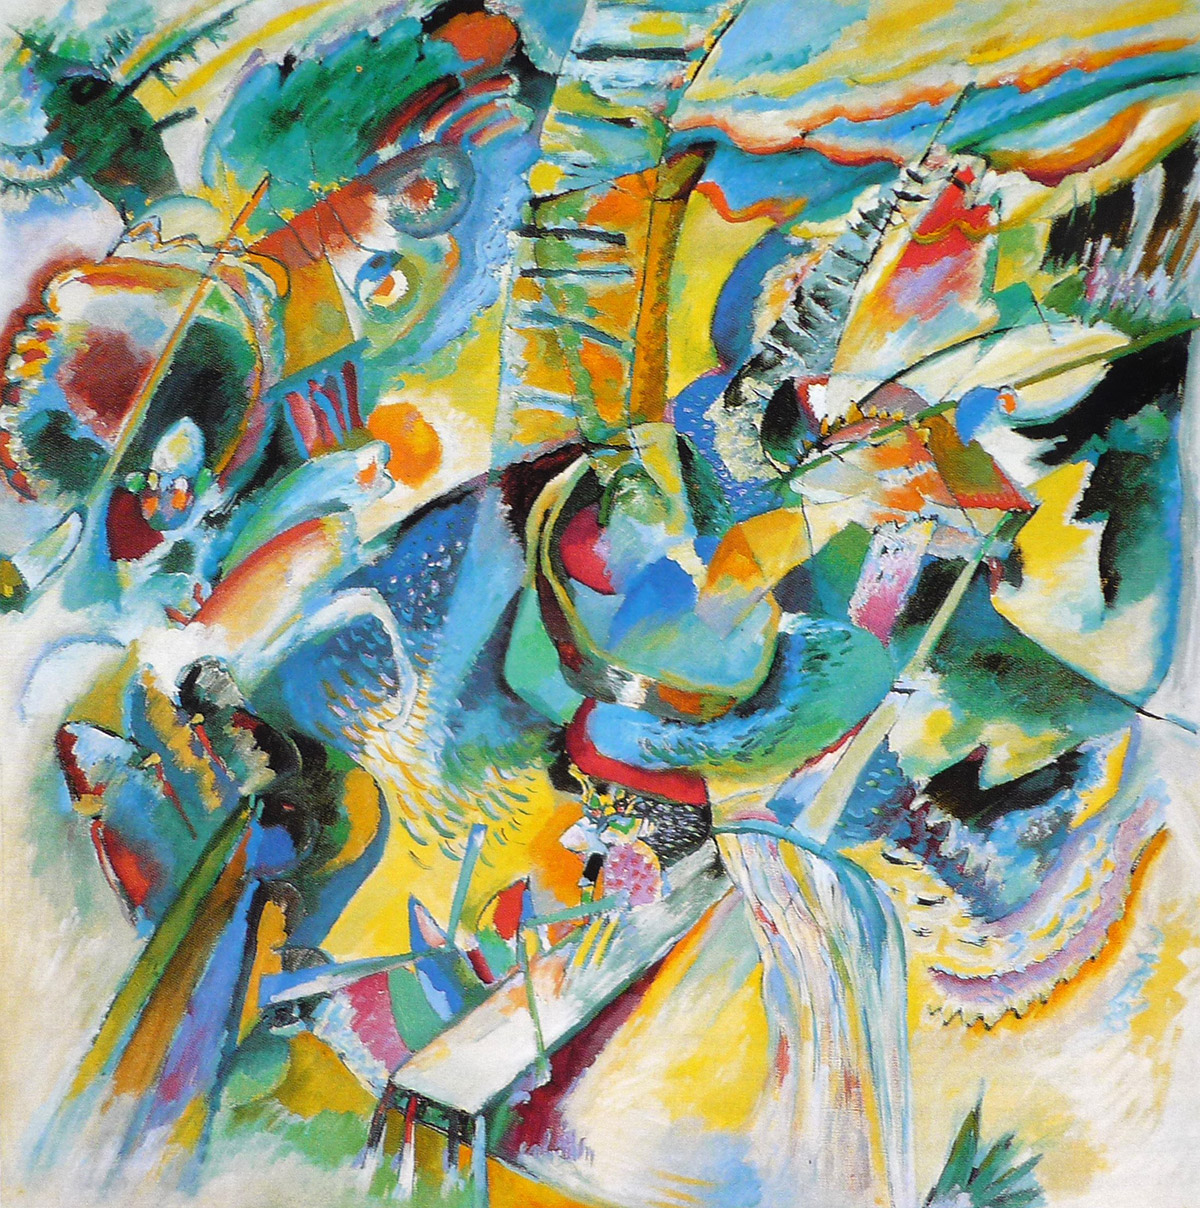 An early Kandinsky, showing him on his way towards pure abstraction.